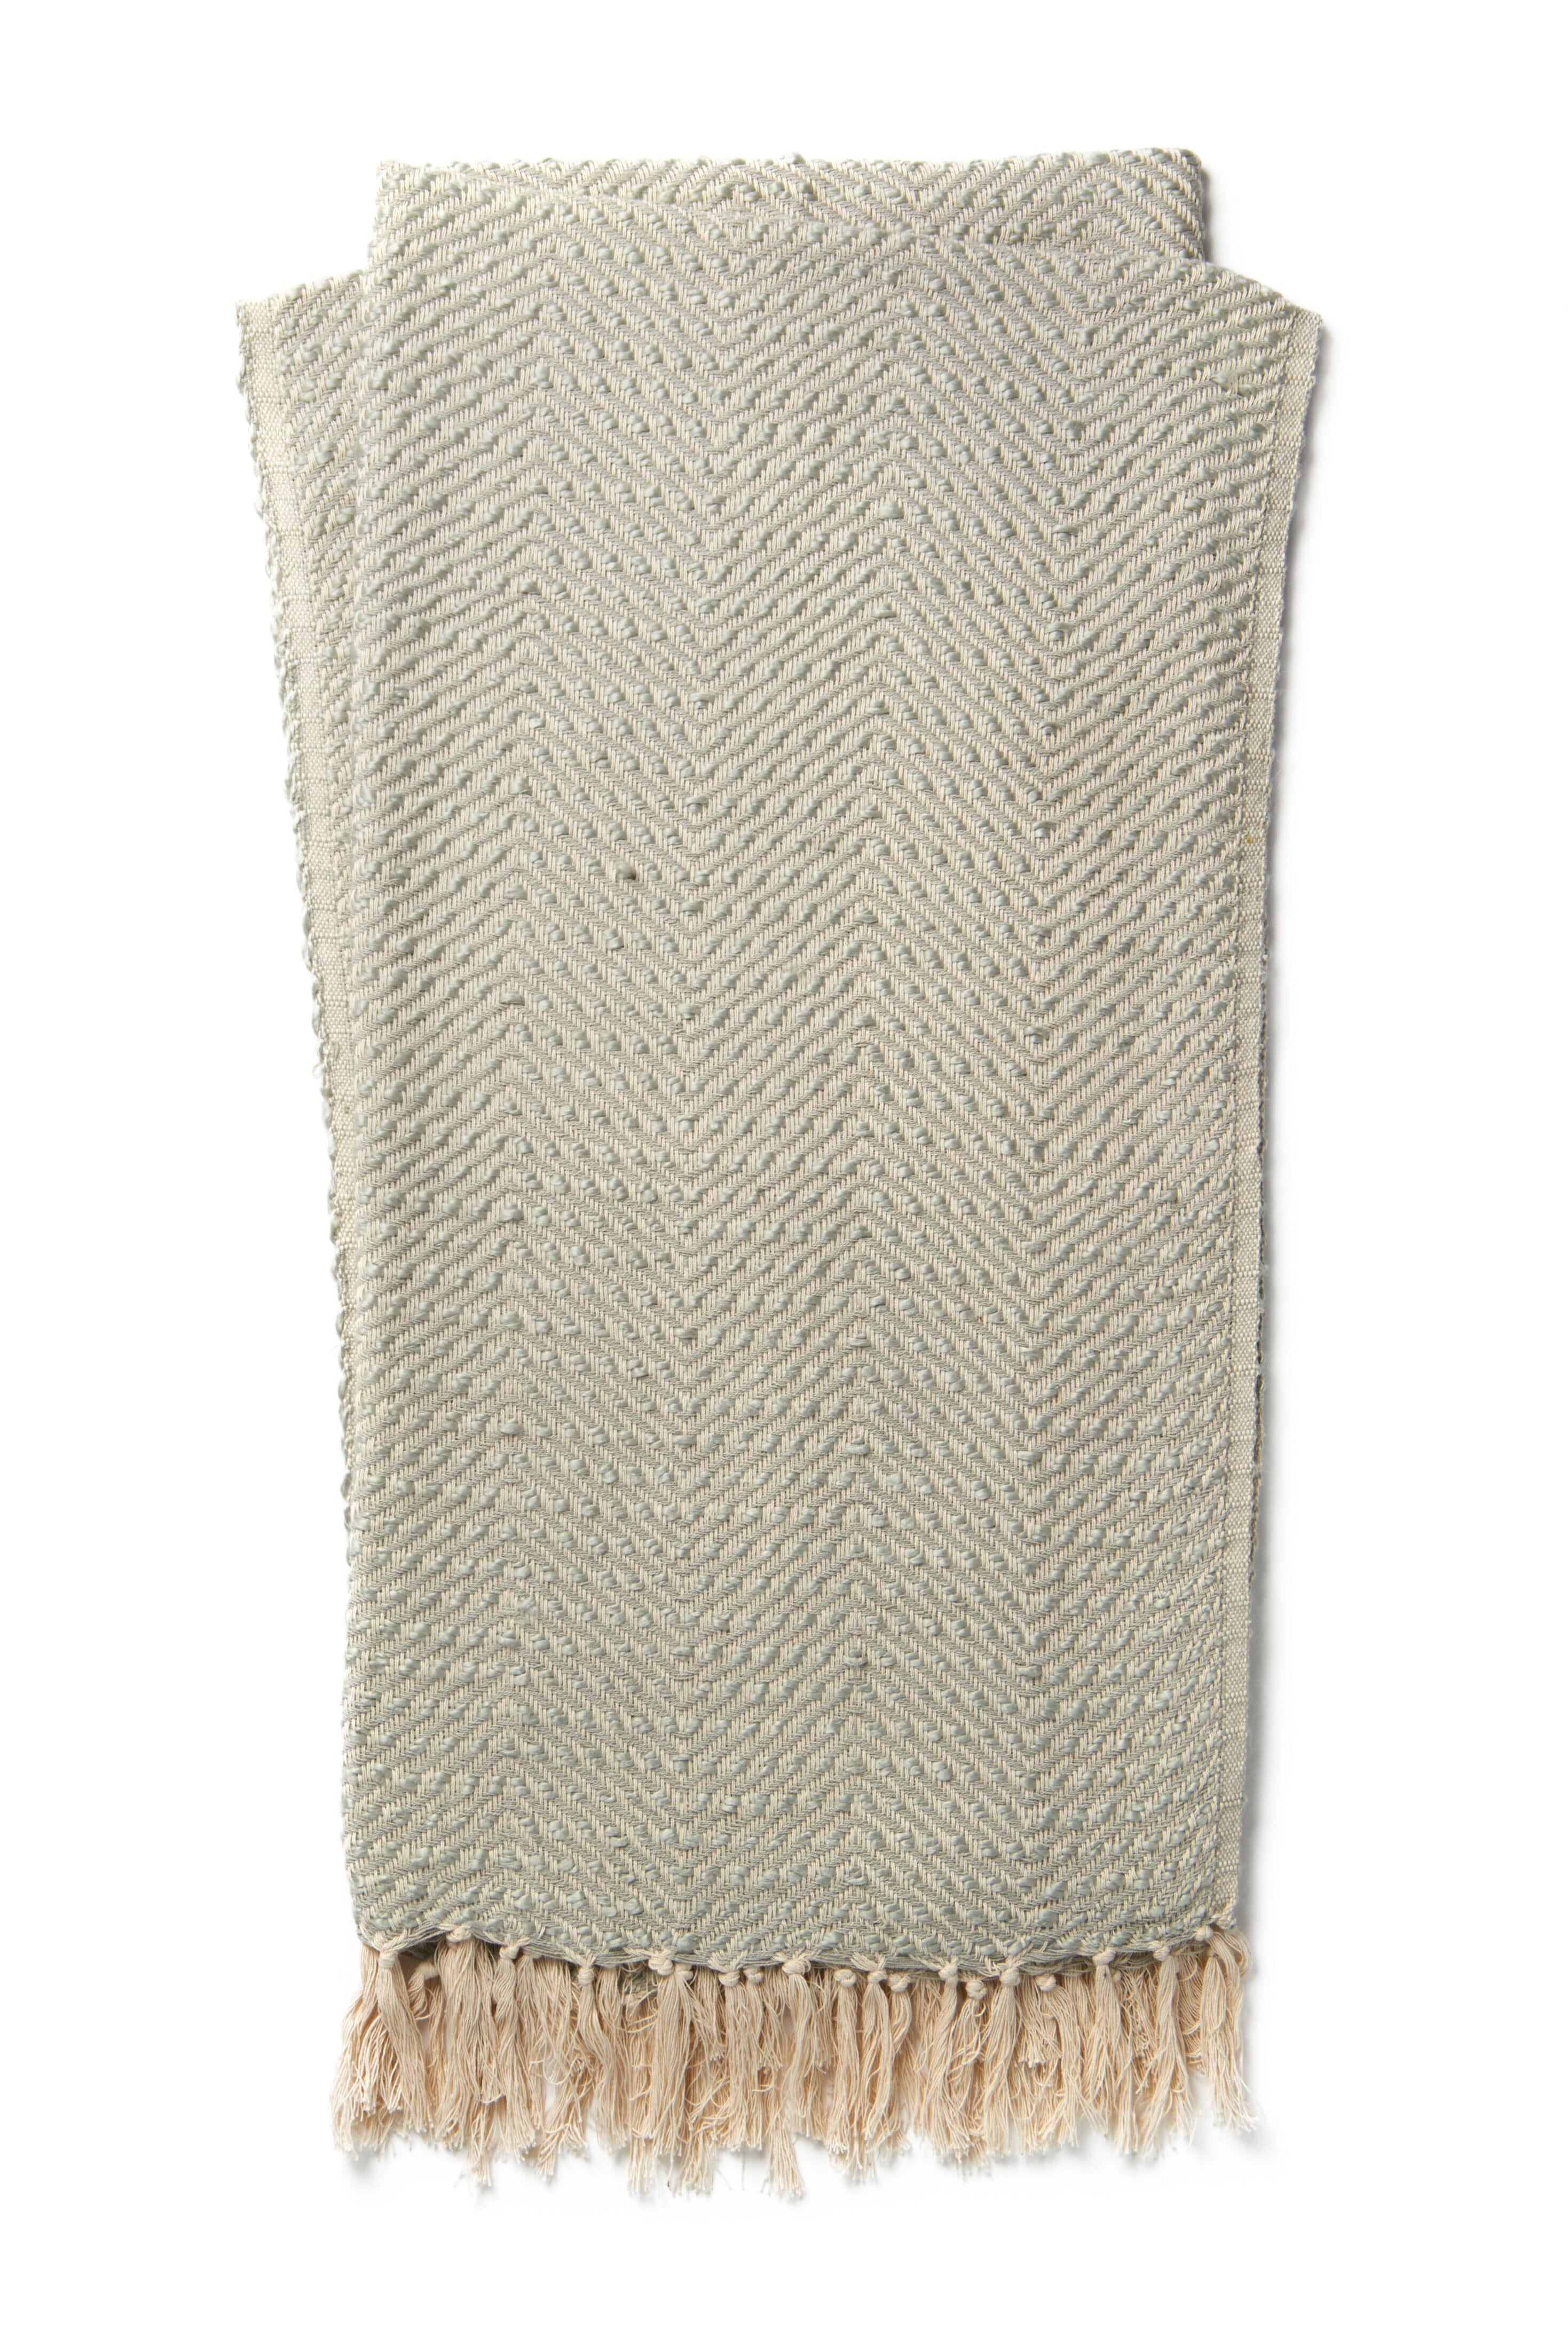 ED Ellen DeGeneres Crafted by Loloi Grove Throw | Grey ED Ellen DeGeneres Crafted by Loloi